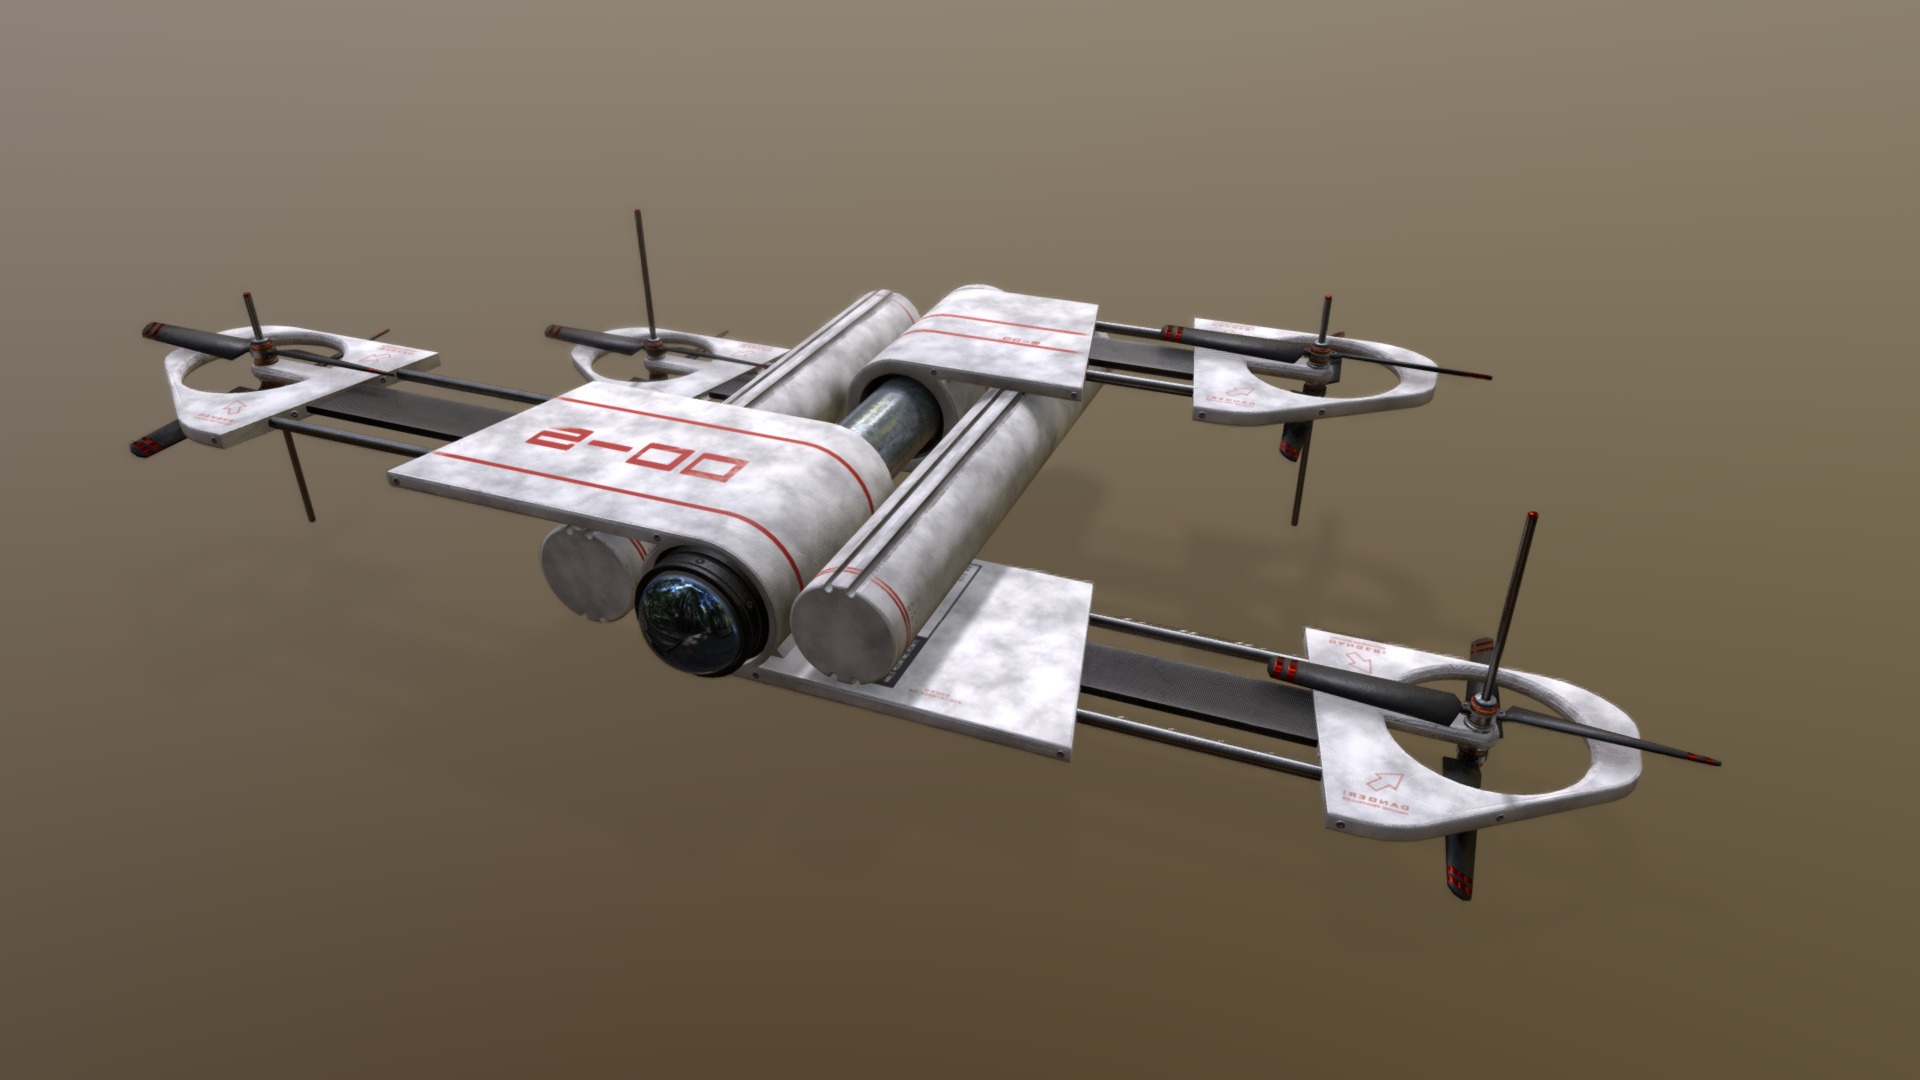 3D model Extending Drone Model 02 - This is a 3D model of the Extending Drone Model 02. The 3D model is about a drone with a paper attached.